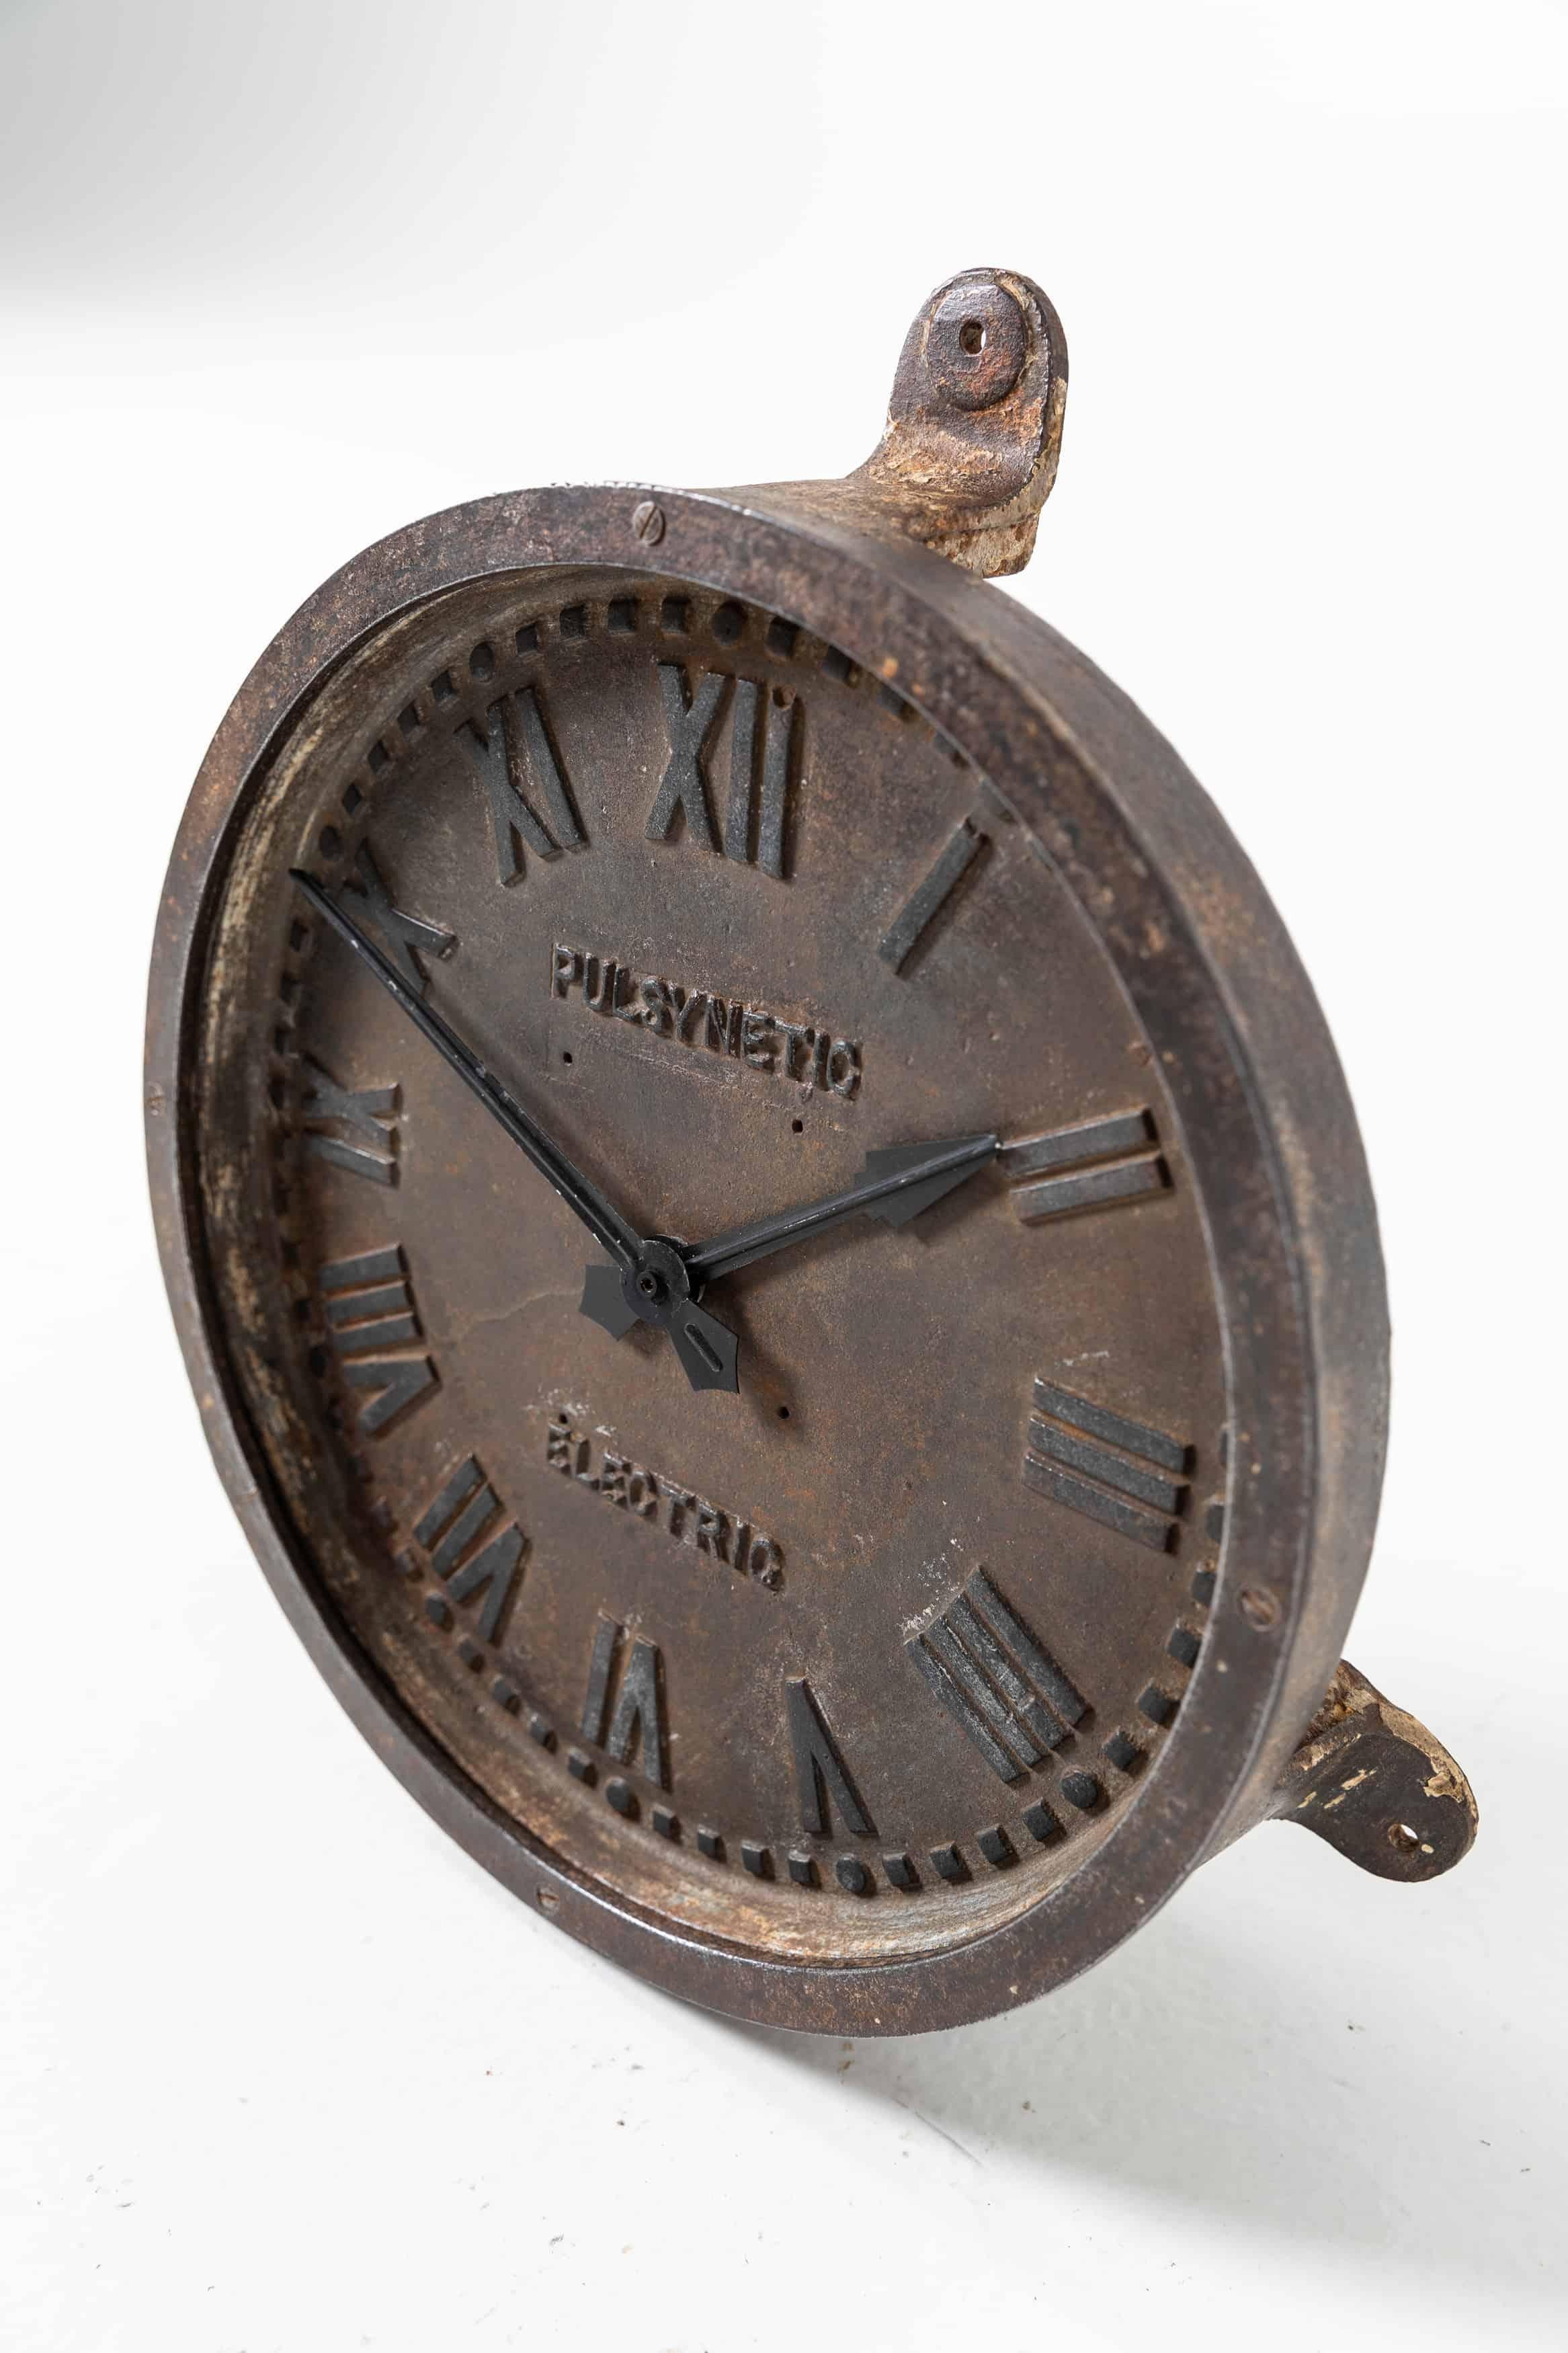 Beautiful example of the iconic cast iron factory wall clock made in England by Gents of Leicester. c.1930. Measure: 12